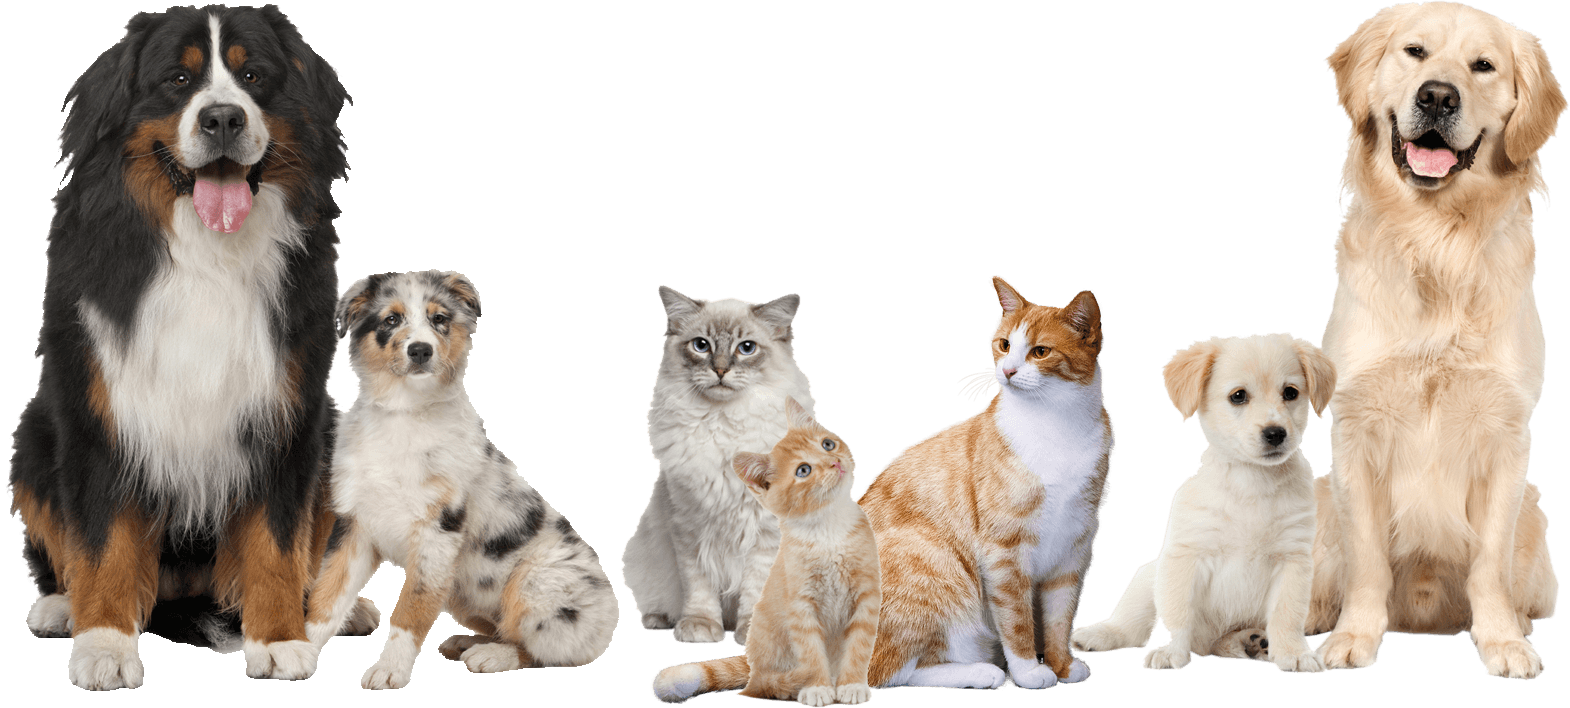 Pet Grooming and the Art of Desensitization